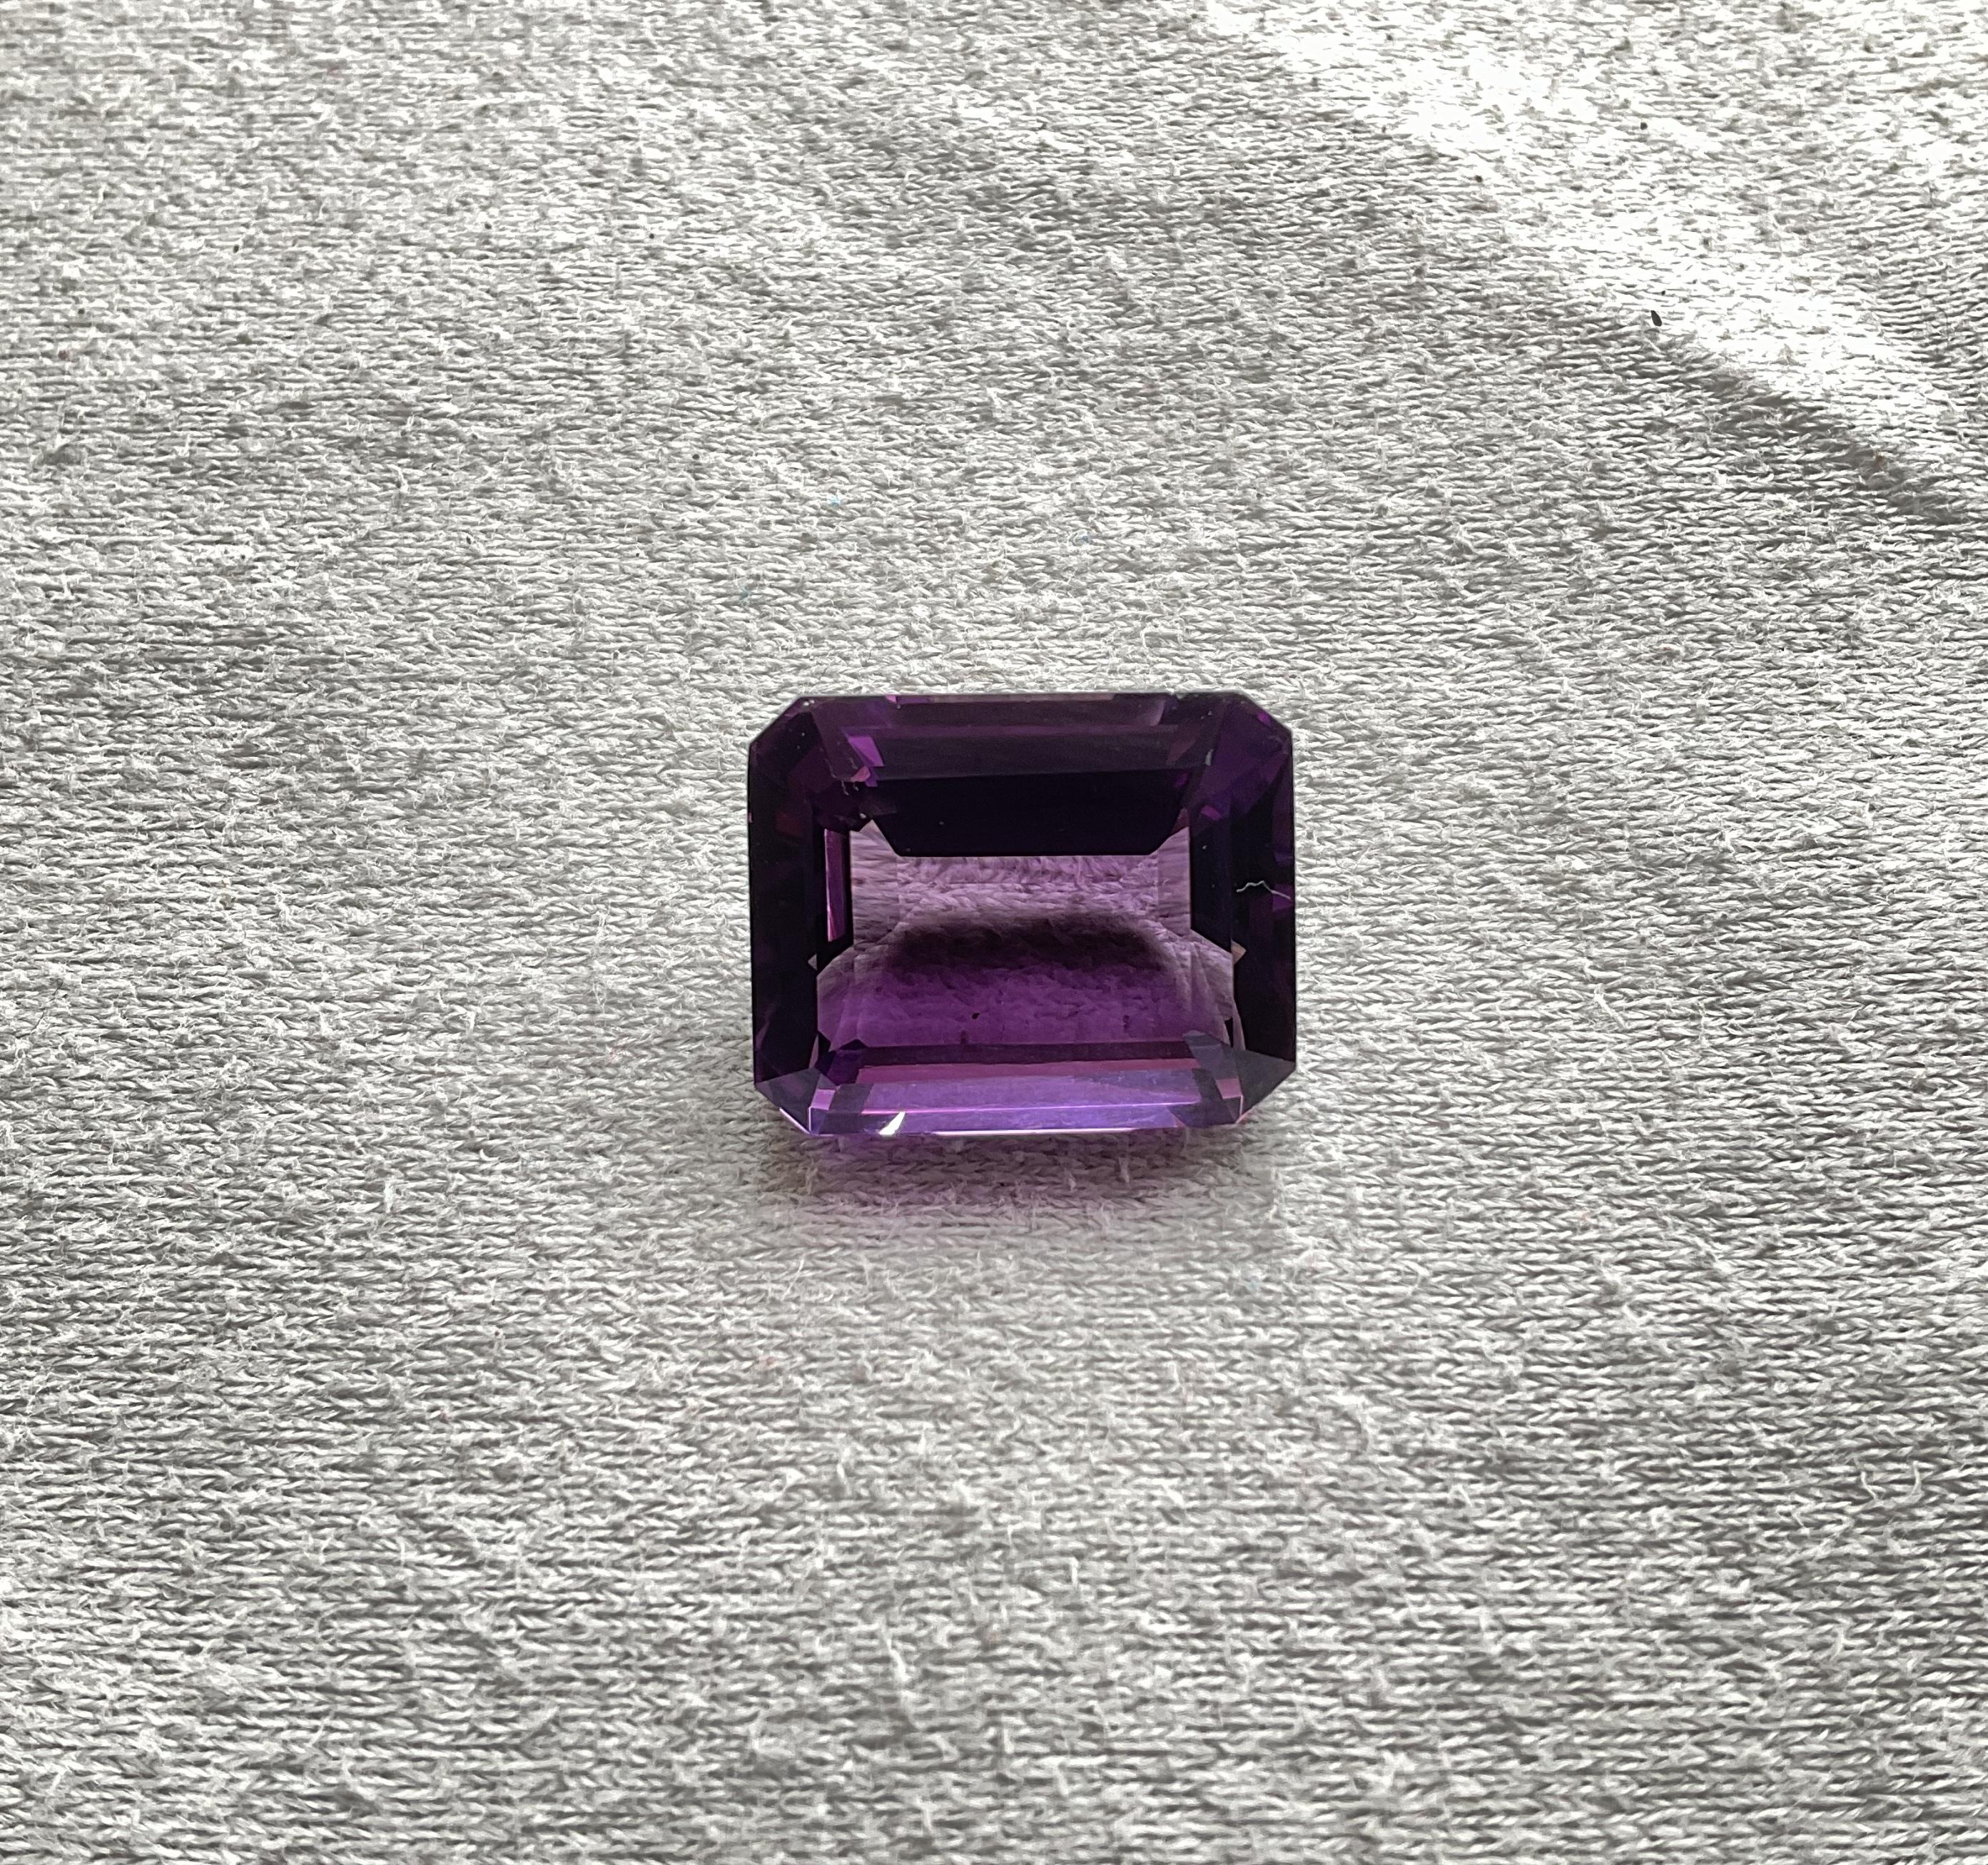 18.67 Carat Amethyst Top Quality Faceted Octagon Loose Gemstone For Jewelry Gem

Gemstone-Amethyst 
Shape - Octagon
size - 17x13.5x8 MM
Weight - 18.67
Quantity - 1 Piece